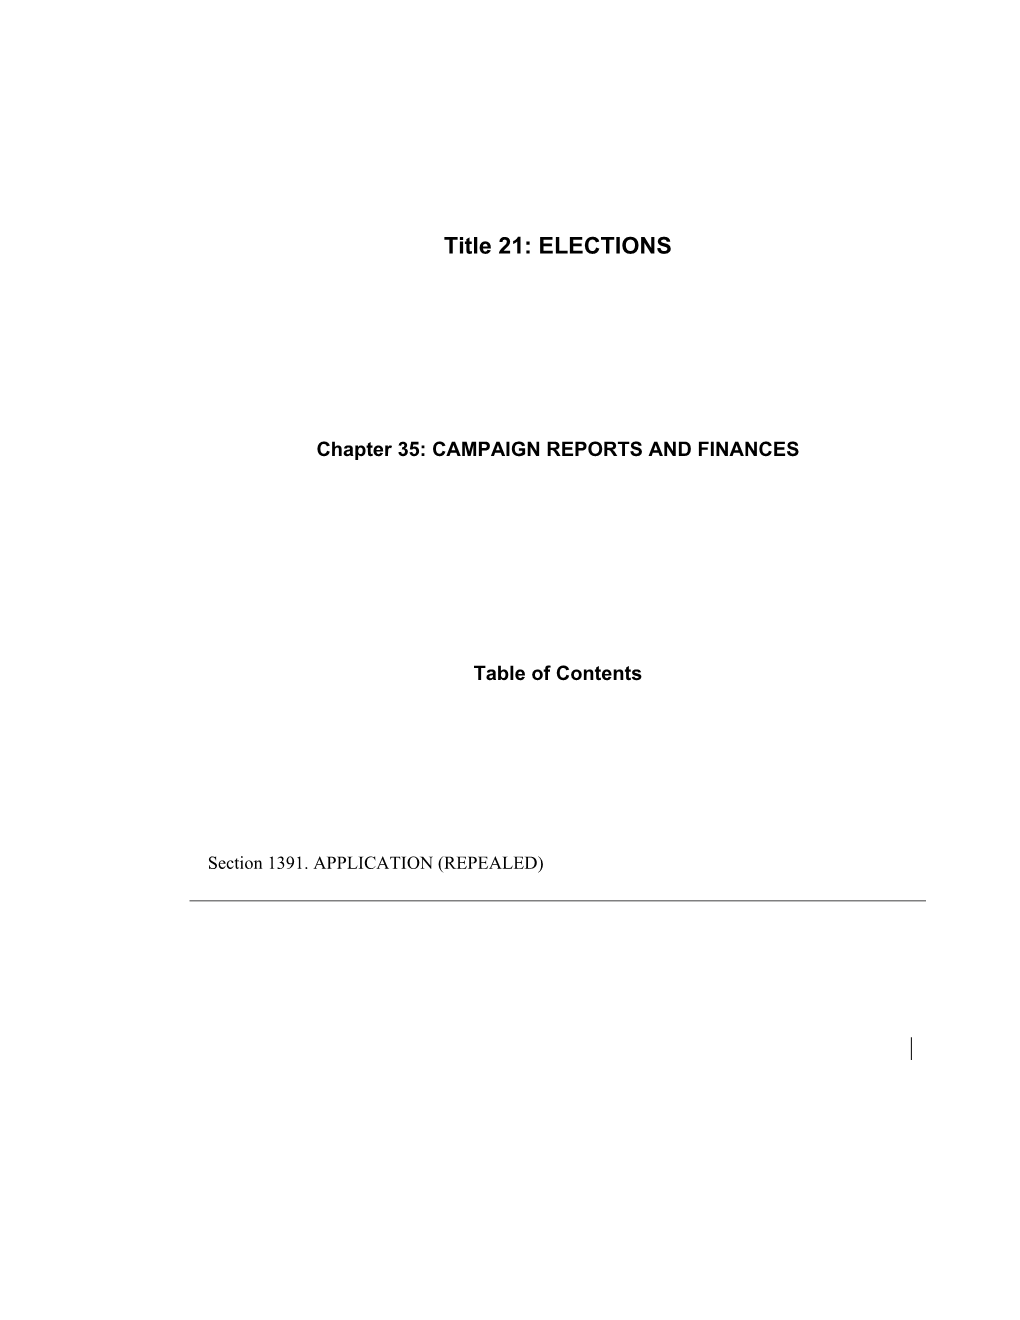 MRS Title 21, Chapter35: CAMPAIGN REPORTS and FINANCES